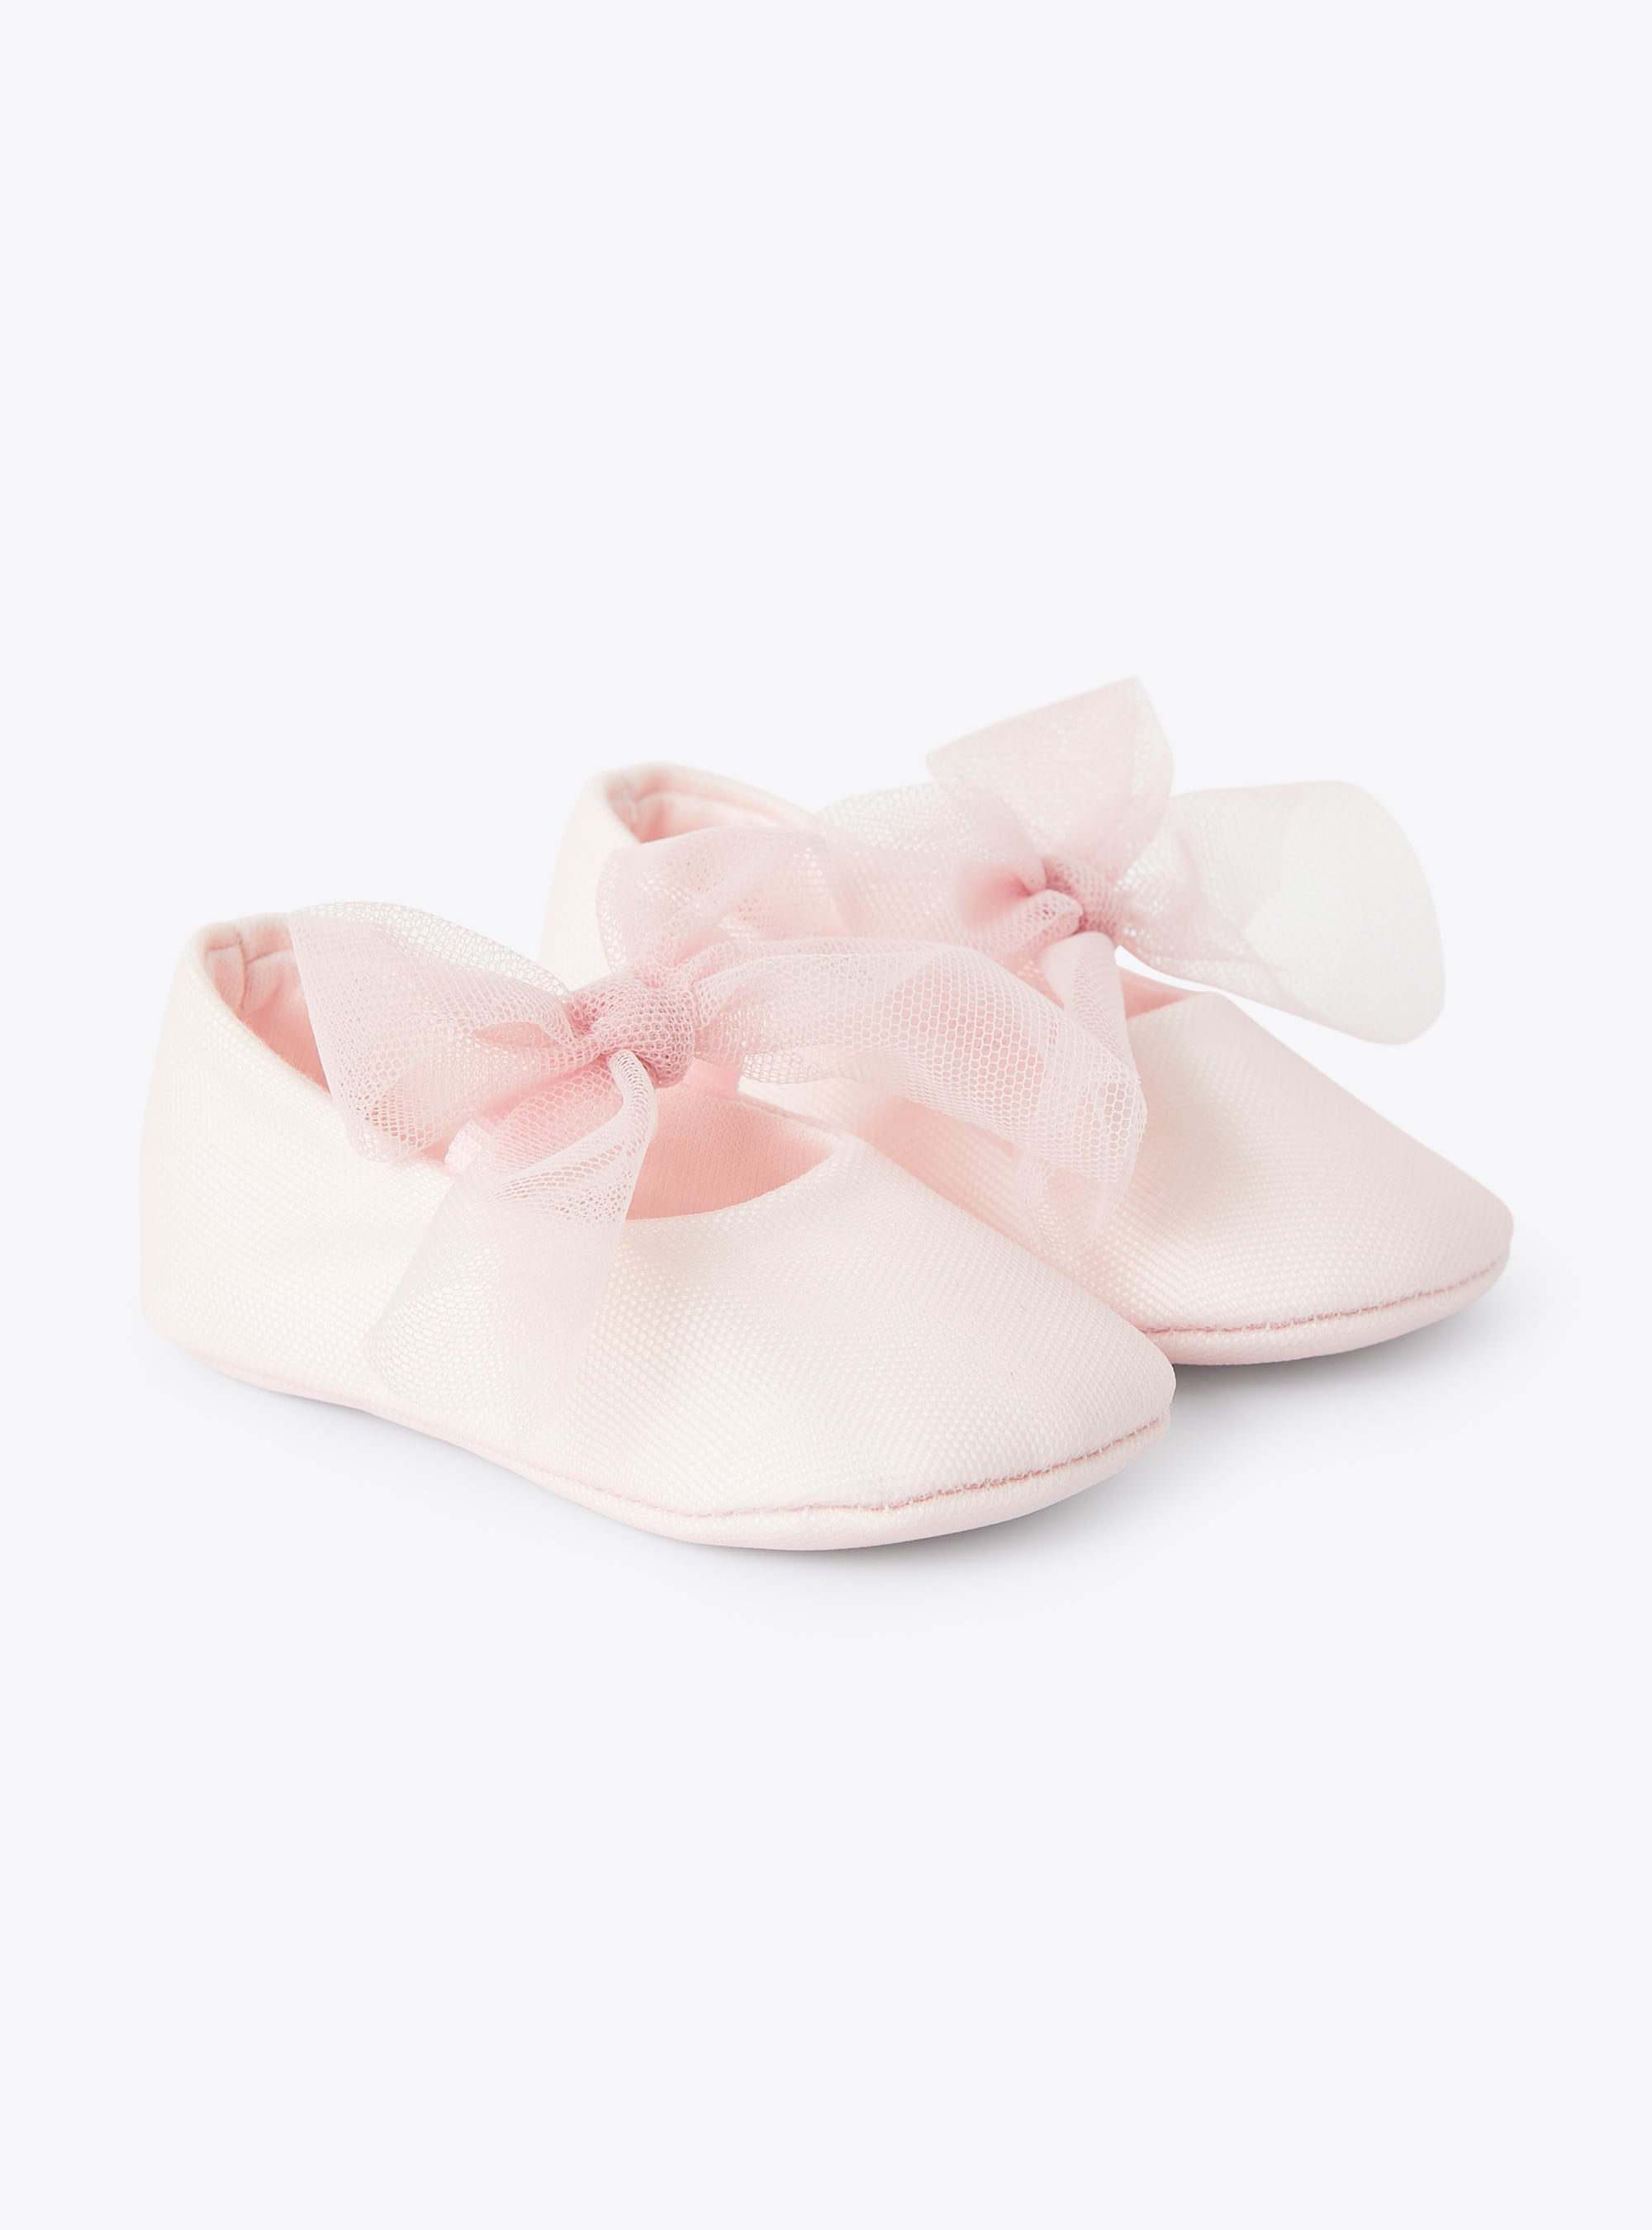 Shoe for baby girls with a pink tulle bow embellishment - Shoes - Il Gufo